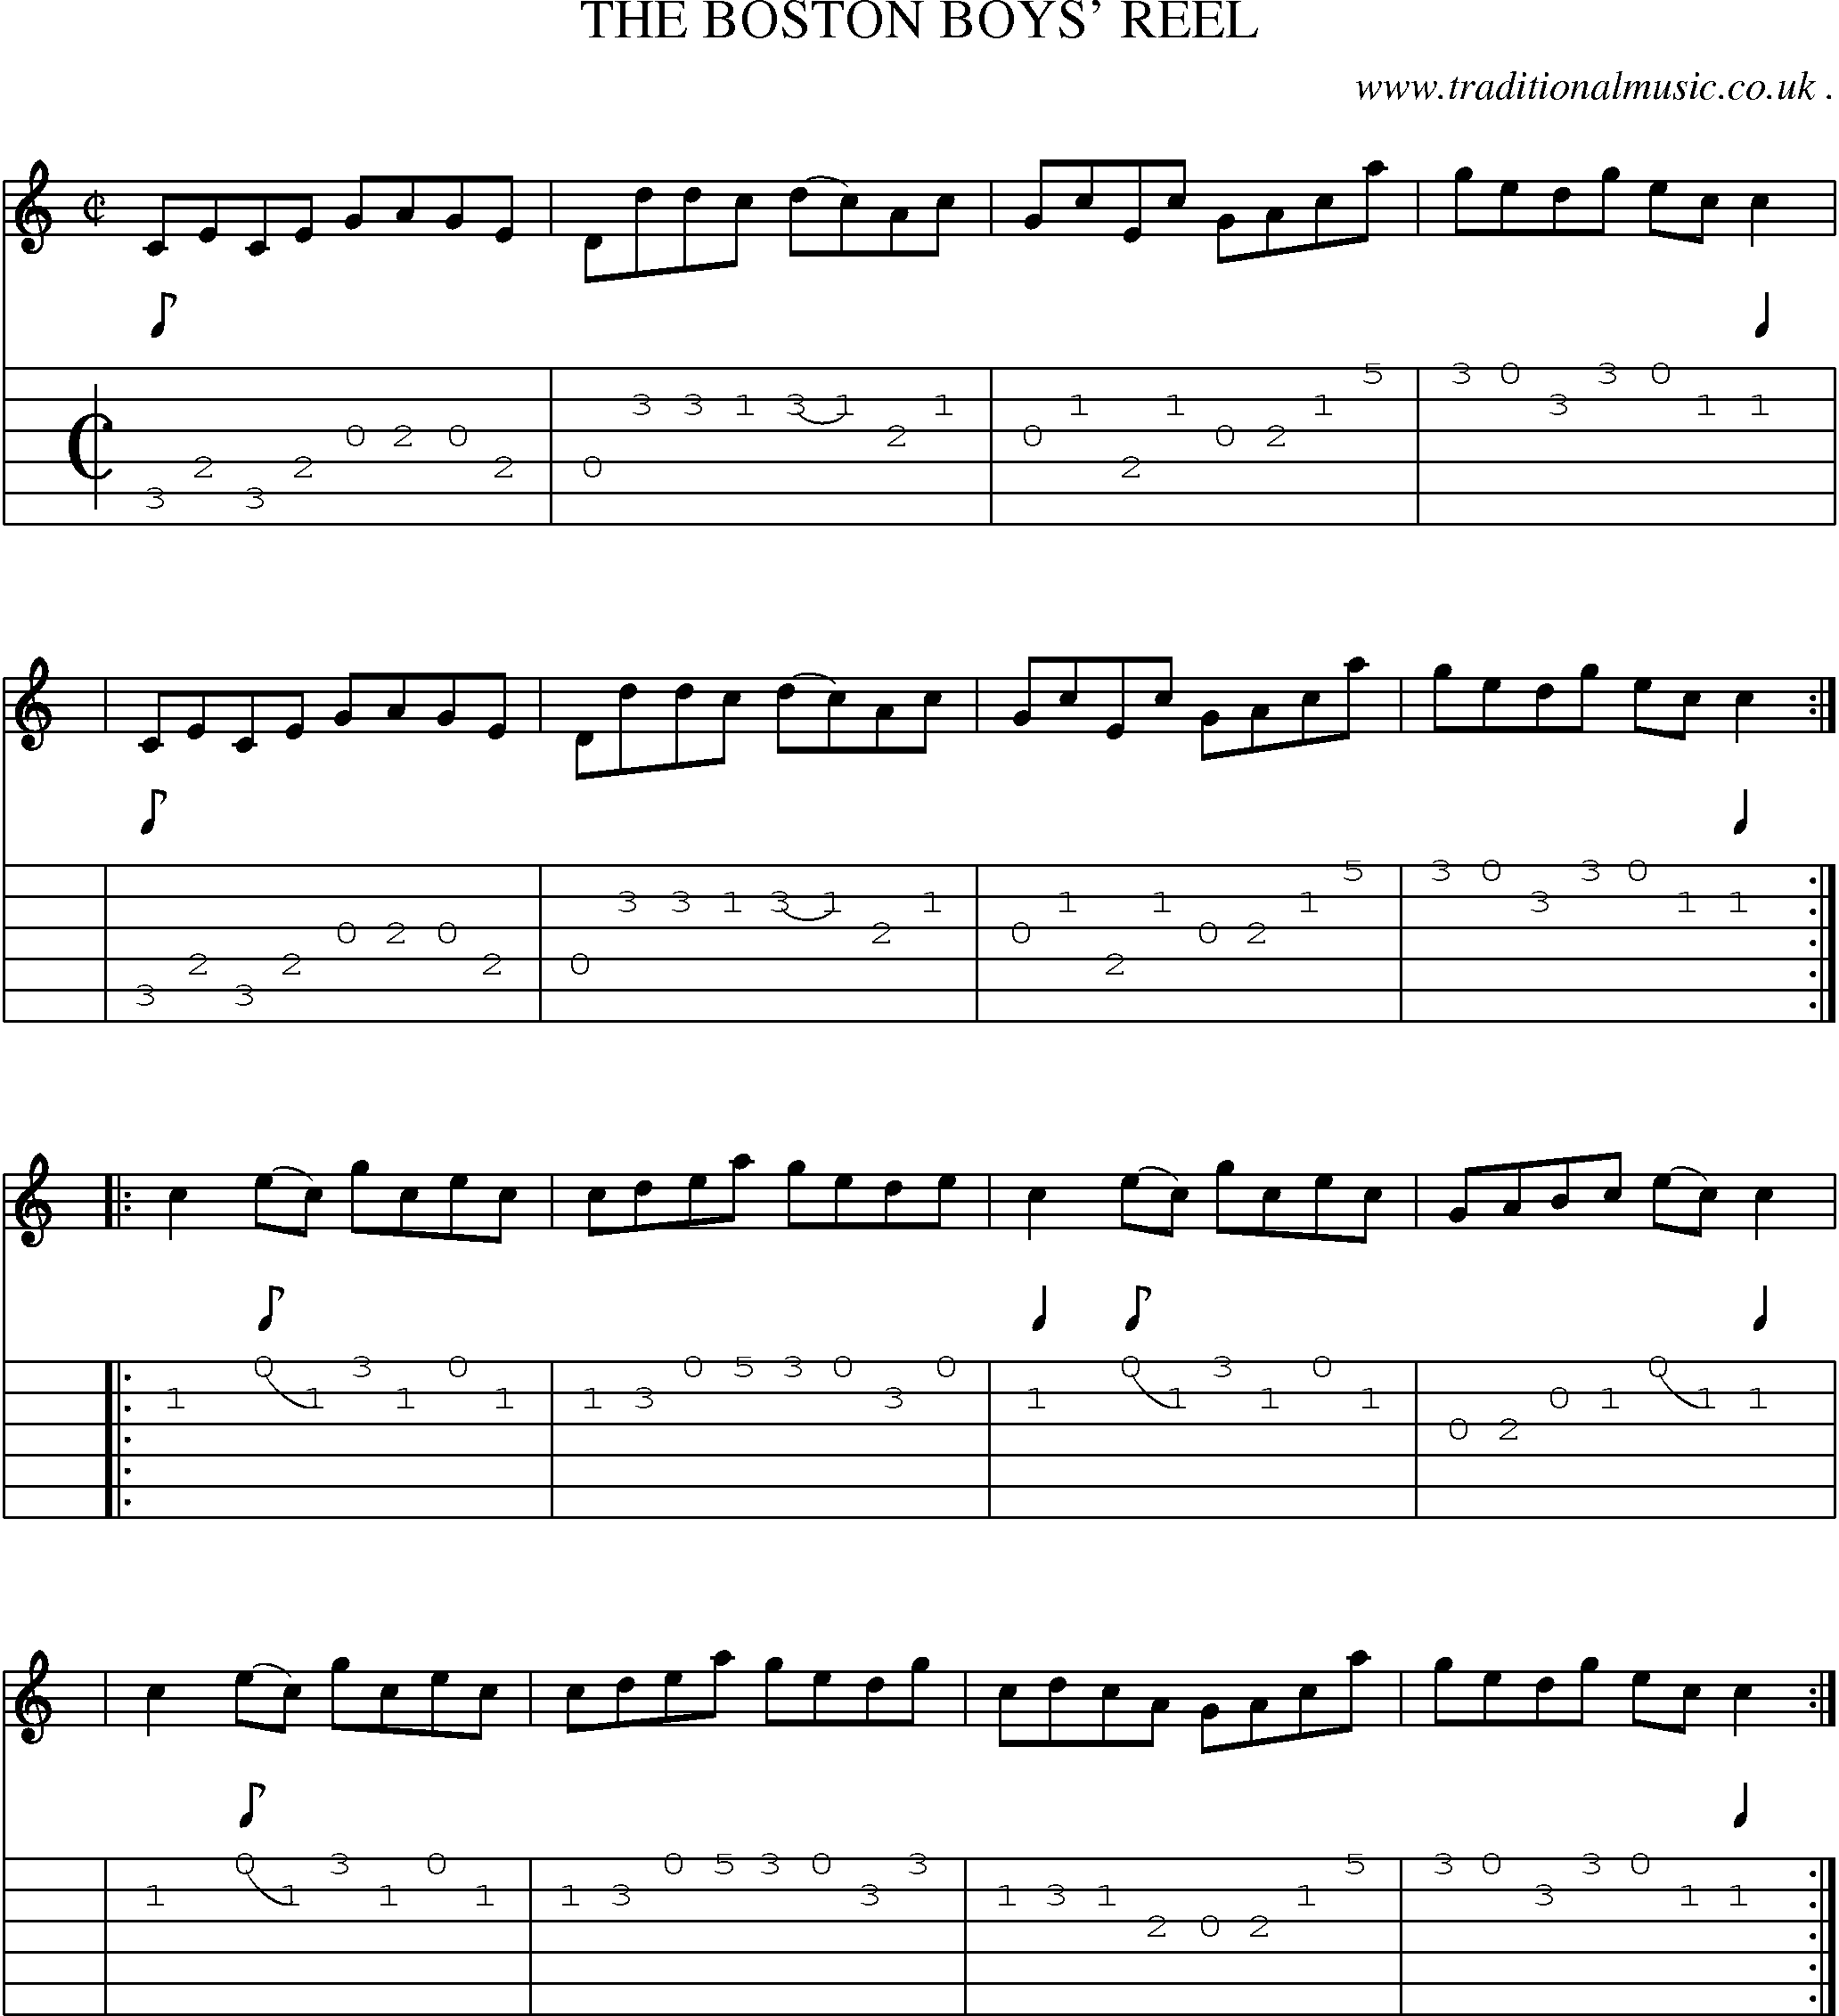 Sheet-Music and Guitar Tabs for The Boston Boys Reel